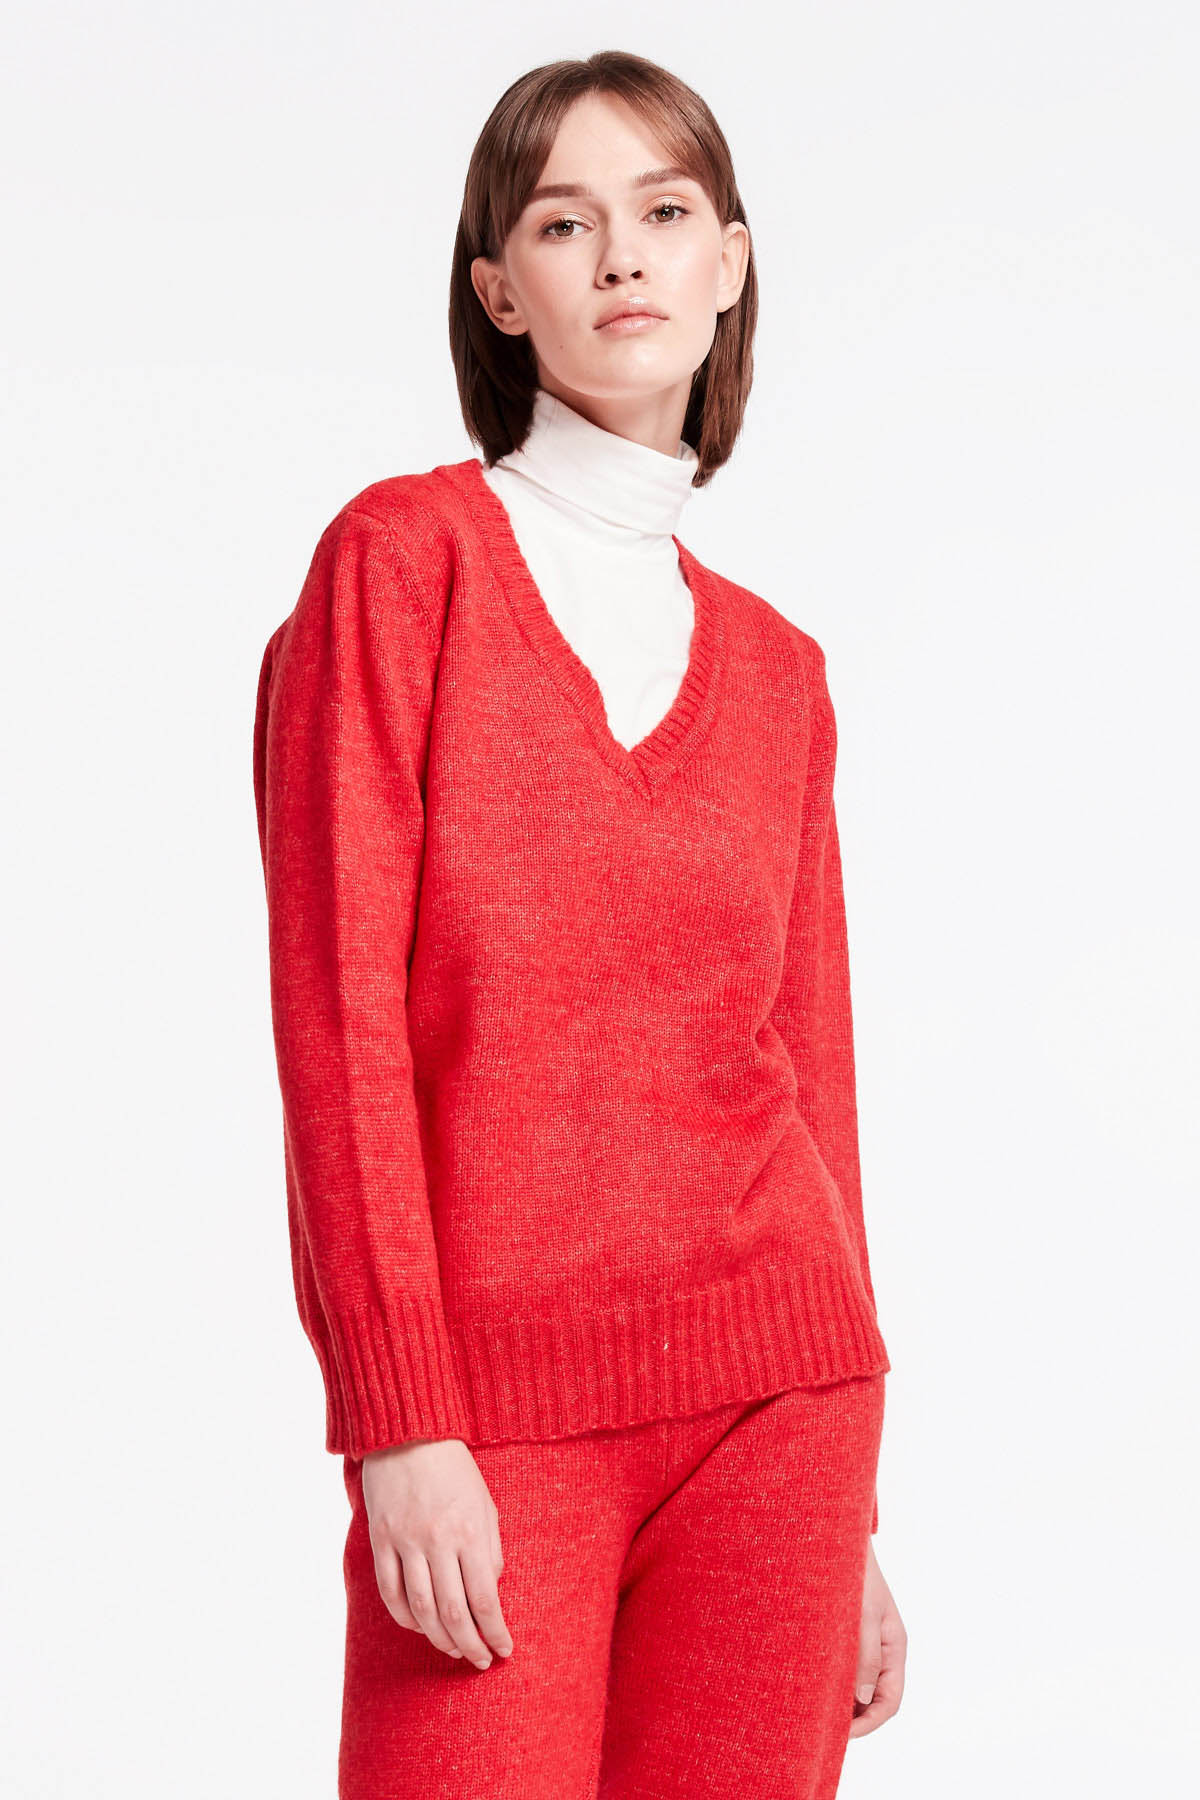 Red V-neck sweater, photo 7